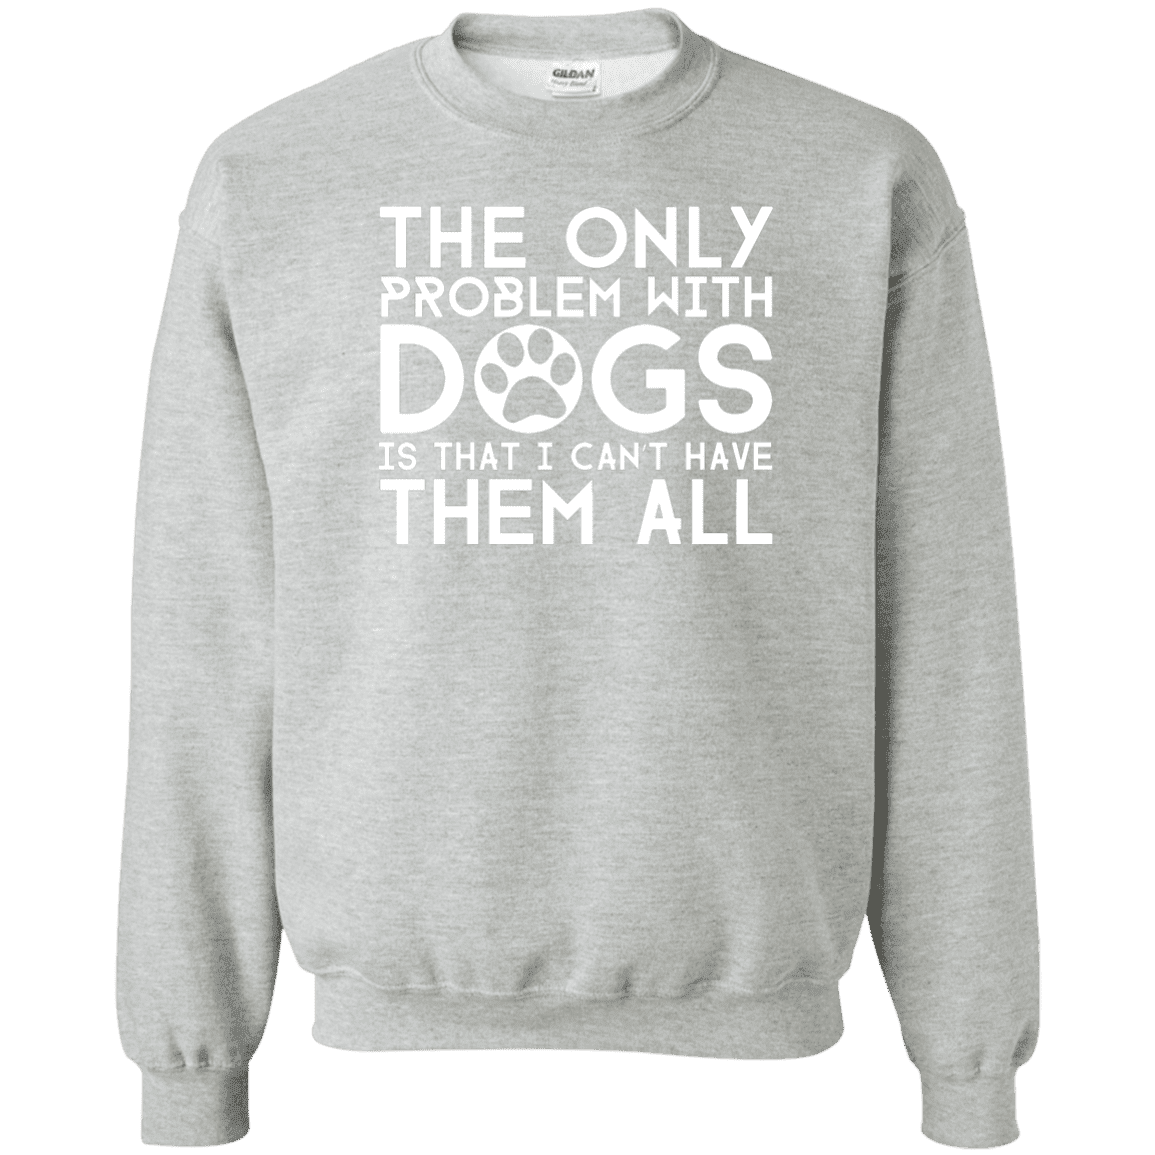 The Only Problem With Dogs - Sweatshirt.